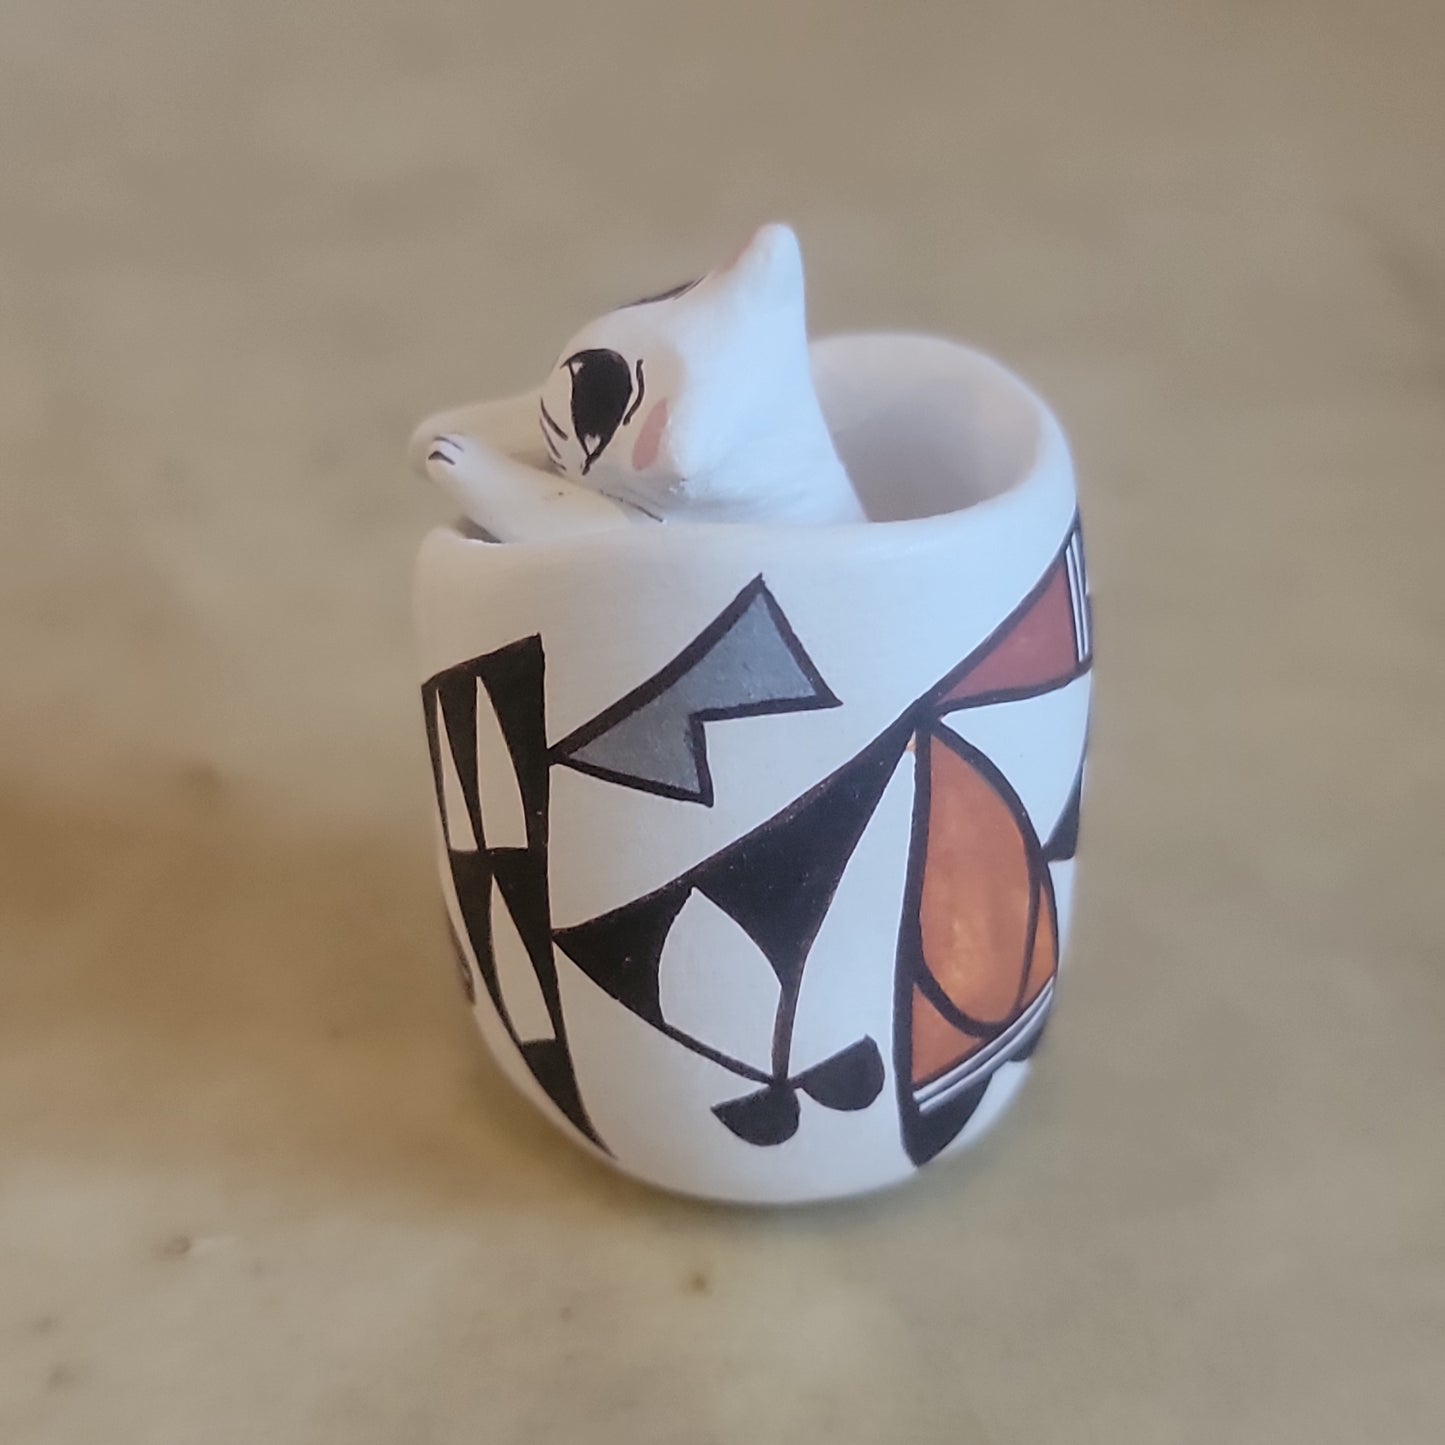 Judy Lewis Sweet Kitty Hiding in Acoma Pueblo Pottery